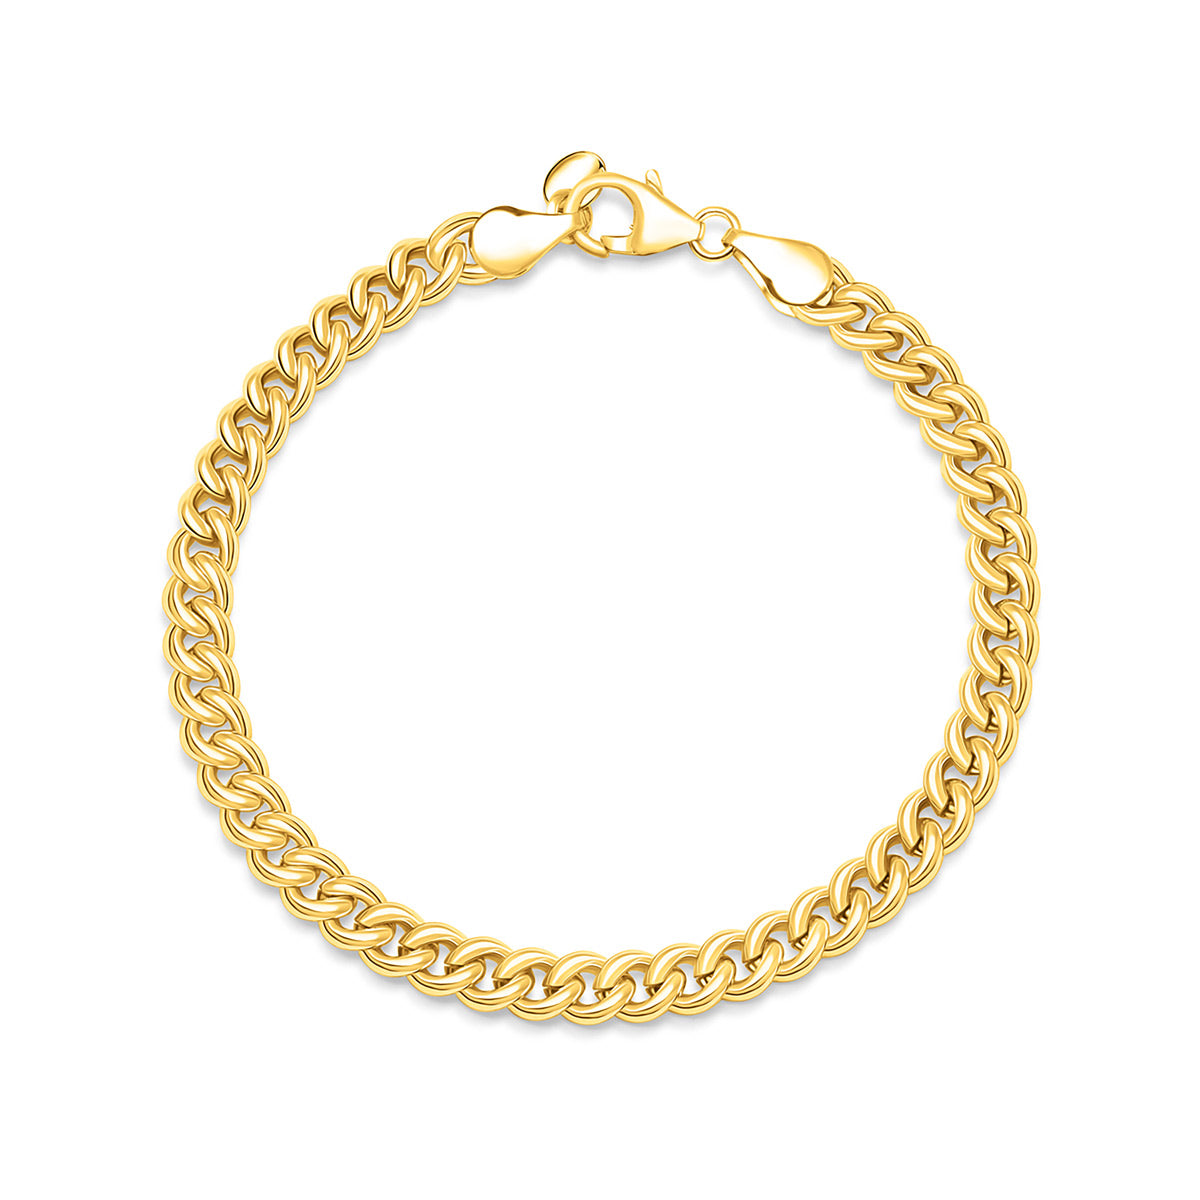 Small gold link chain bracelet